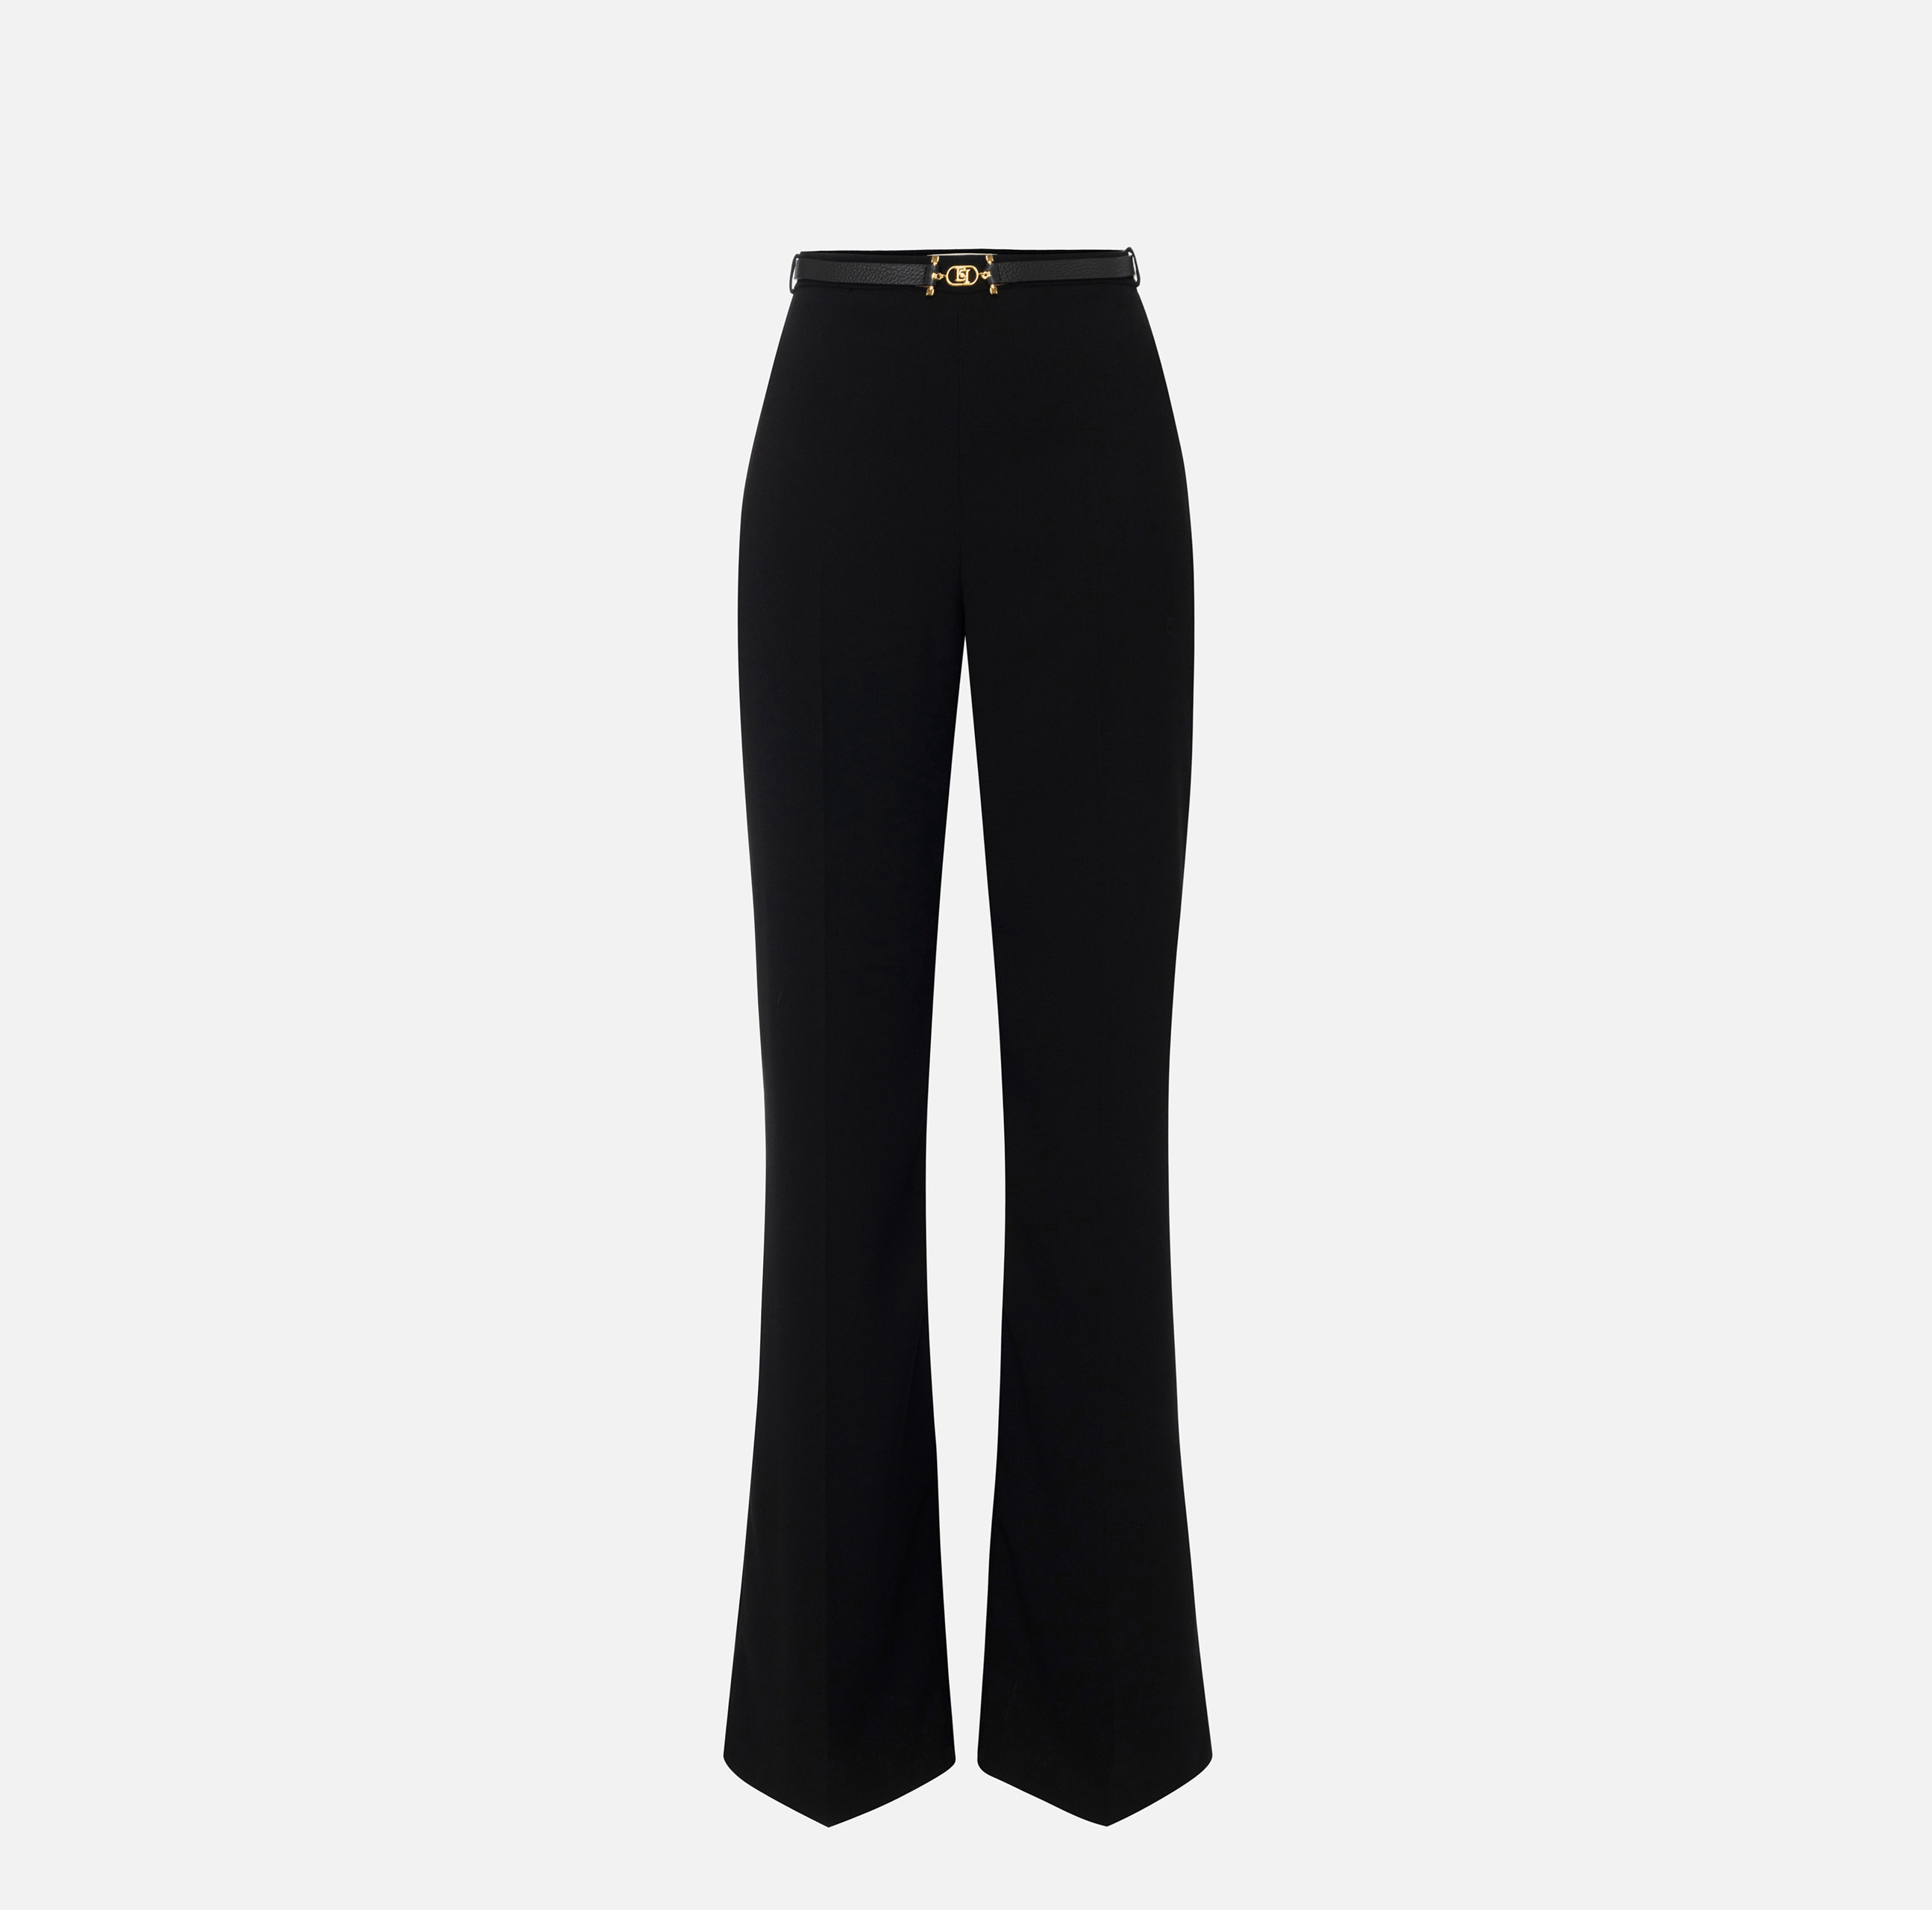 Palazzo trousers in flowing crêpe fabric with belt - ABBIGLIAMENTO - Elisabetta Franchi